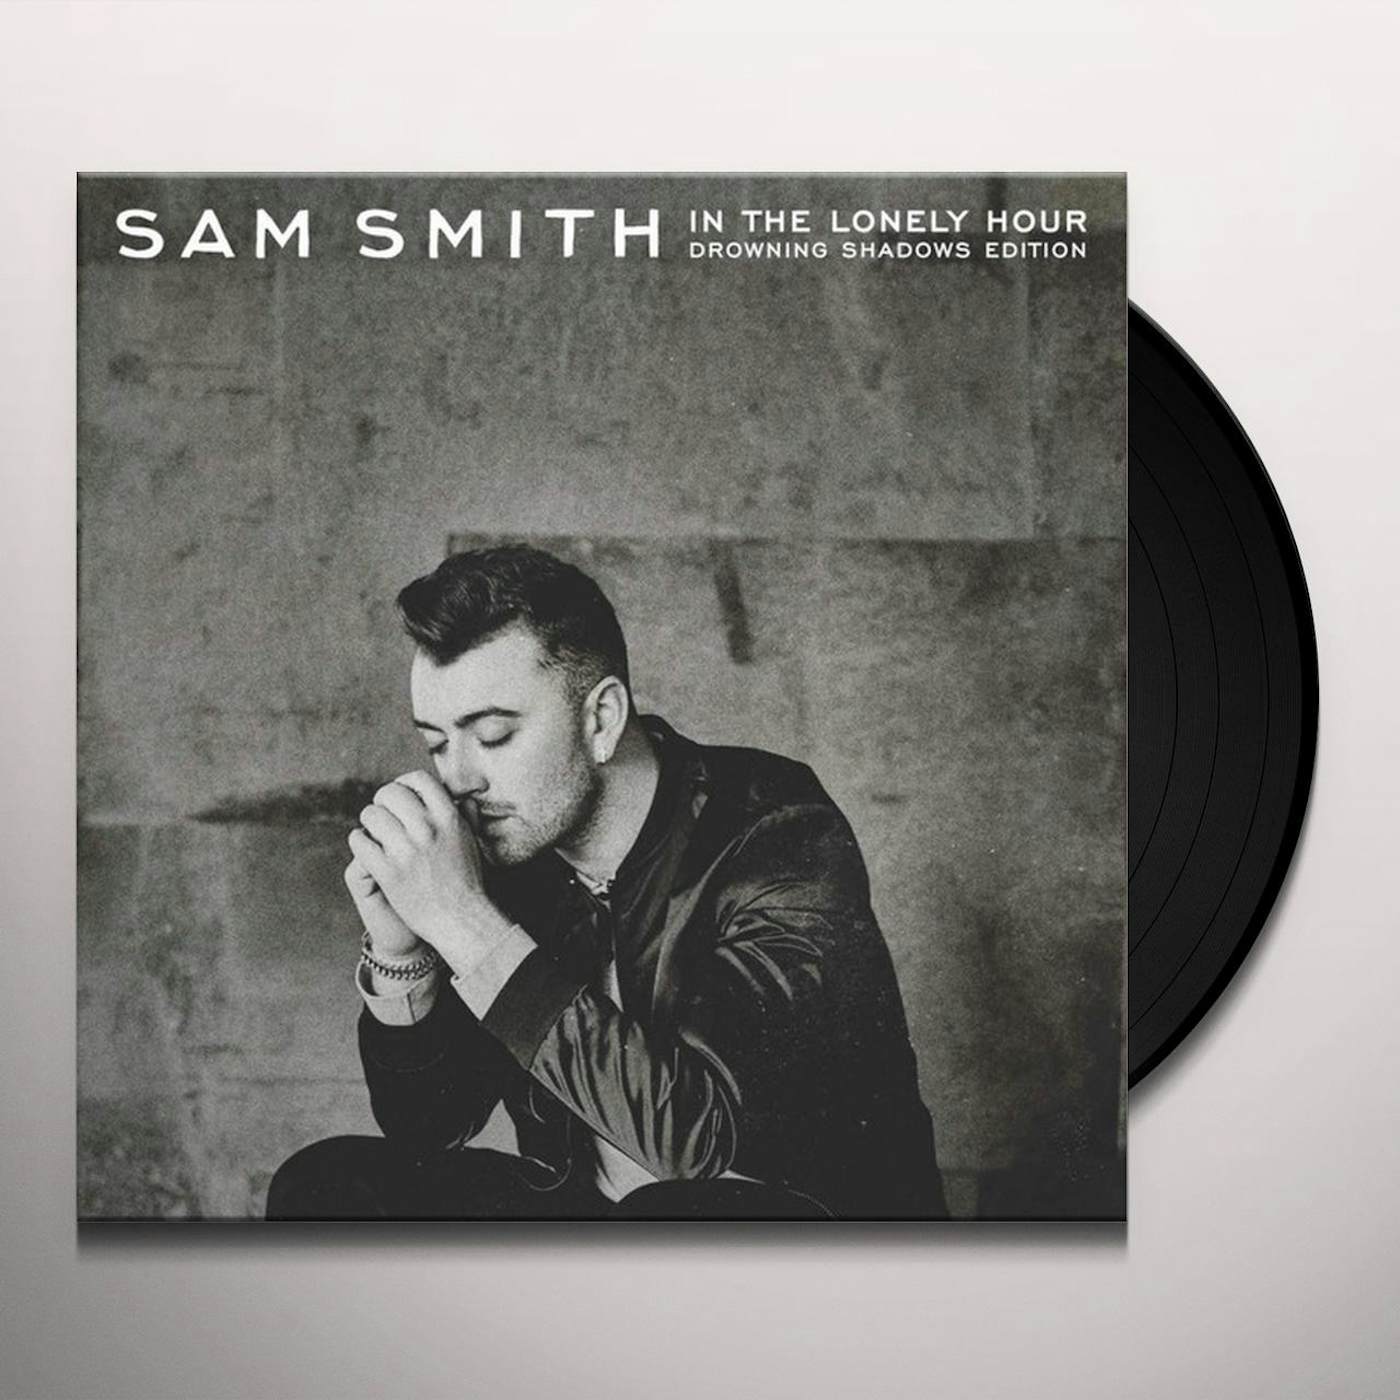 Sam Smith IN THE LONELY HOUR: DROWNING SHADOWS EDITION Vinyl Record